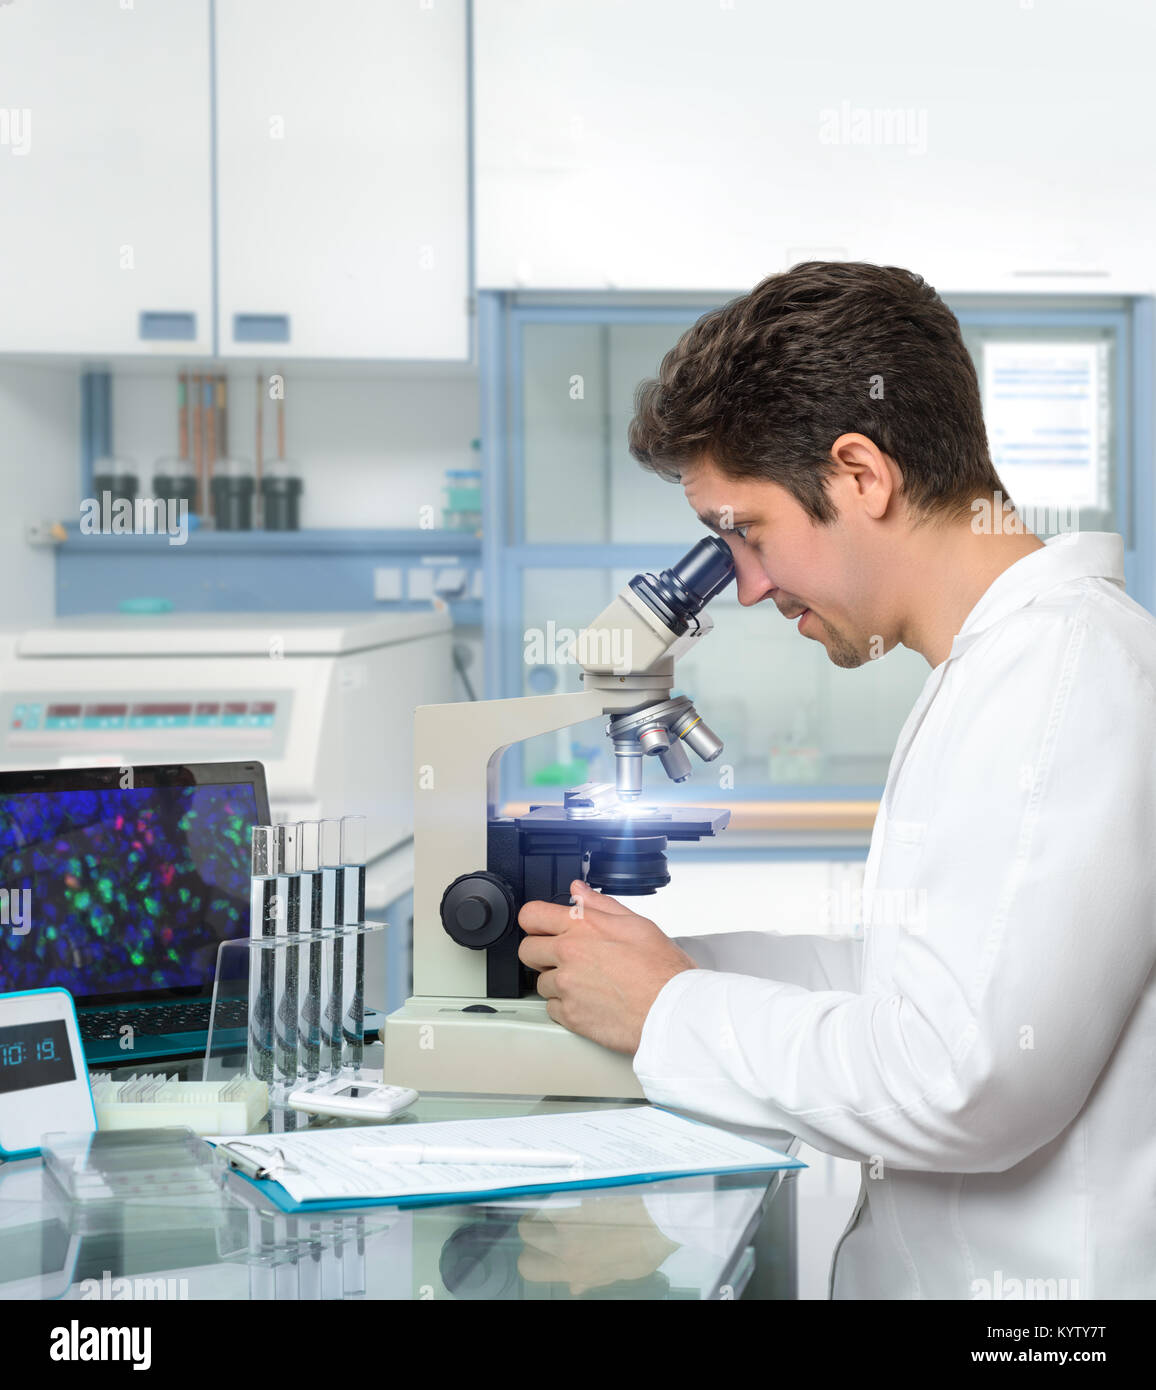 Male scientist or tech works with microscope in modern research facility Stock Photo